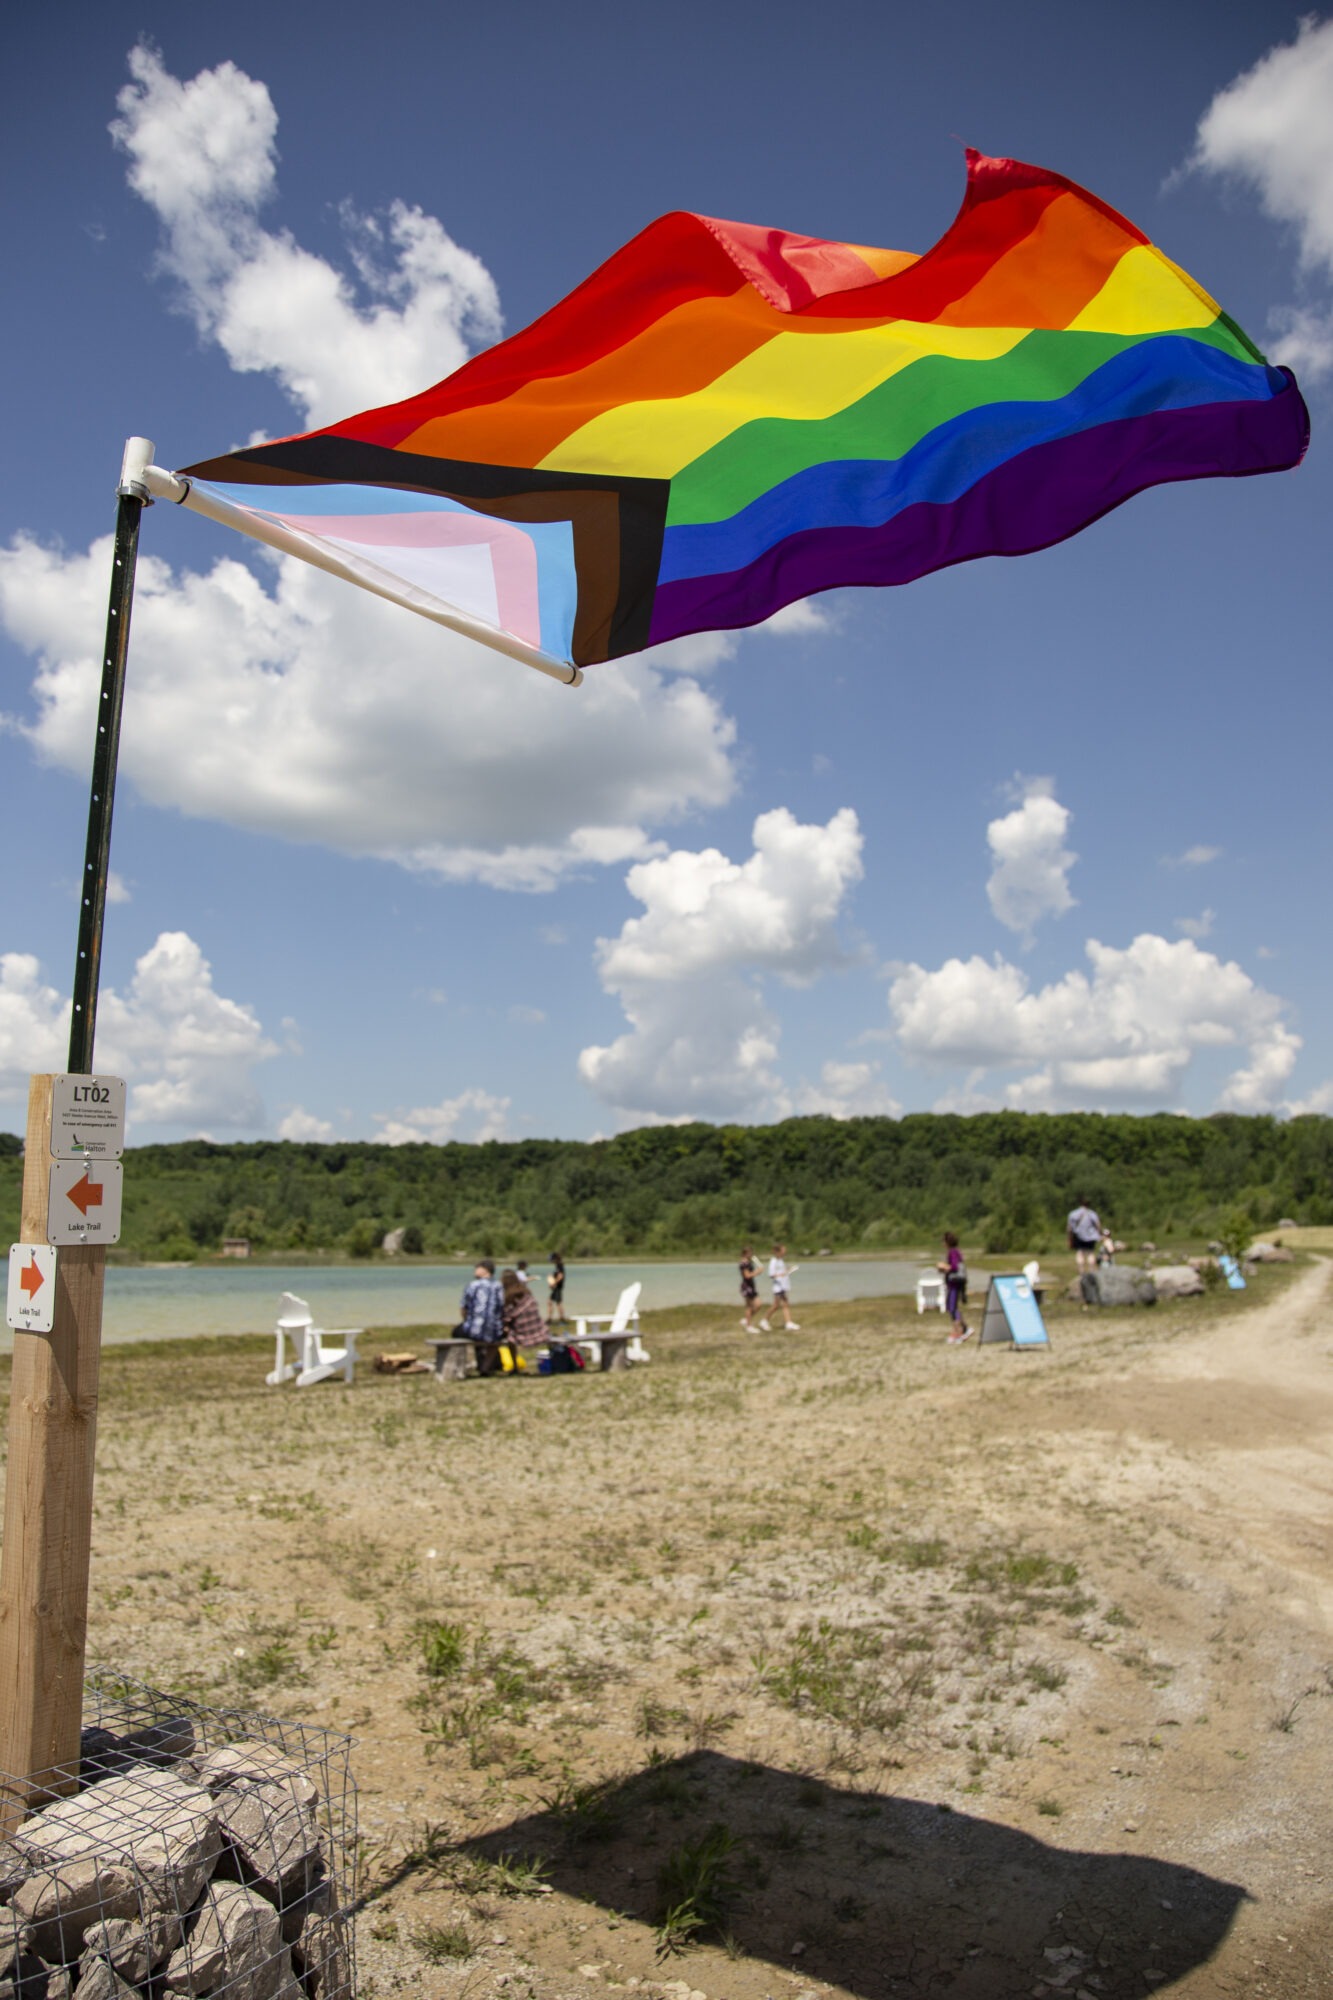 a pride flag in the wind, a beach with people sitting in the sand can be seen in the background